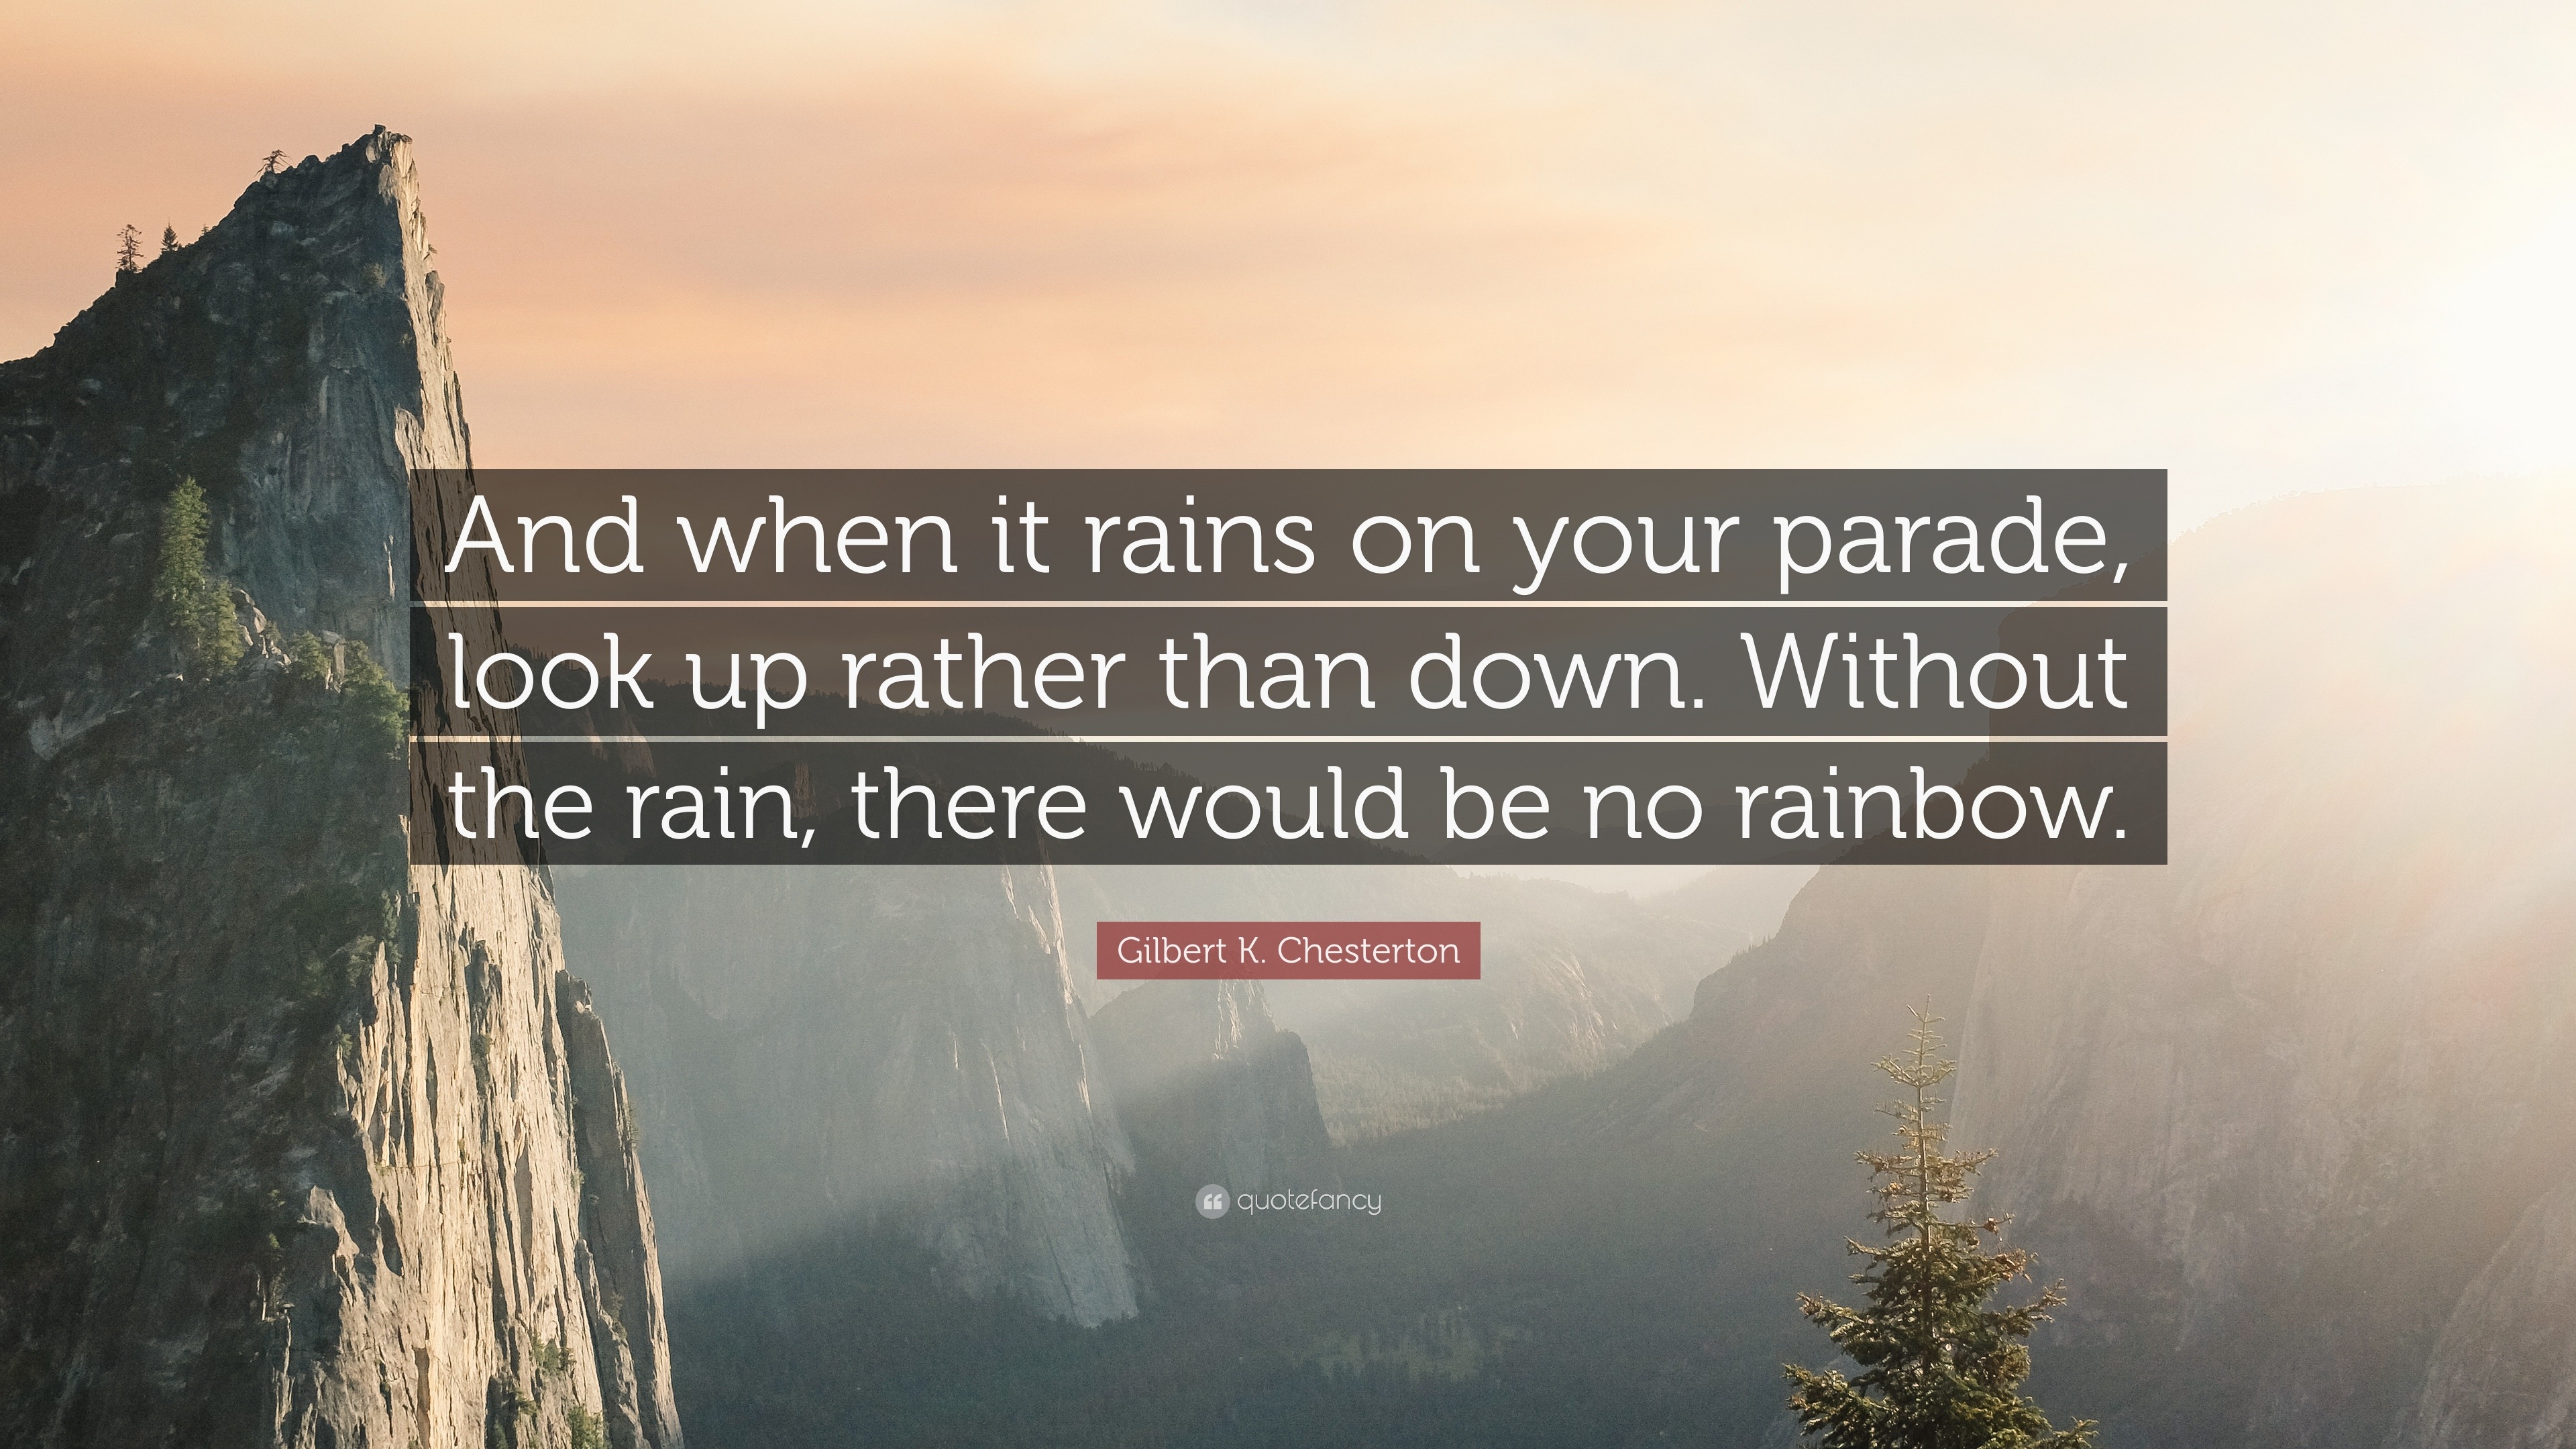 rain on your parade quotes